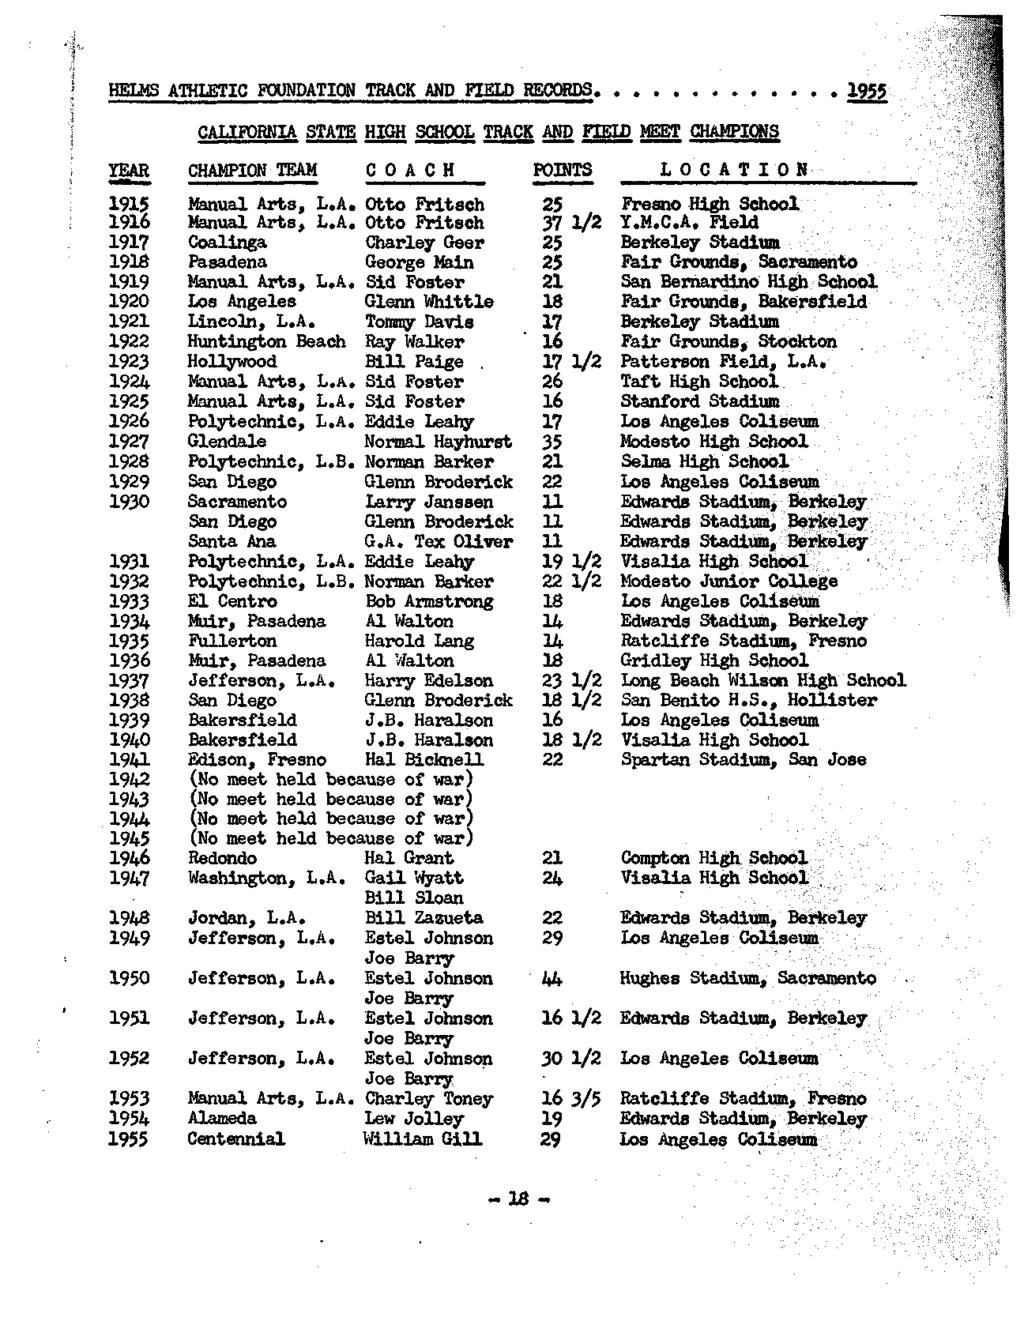 HELMS ATHLETIC FOUNDATION TRACK AND FIELD RECORDS 1955 CALIFORNIA STATE HIGH SCHOOL TRACK AND FIELD MEET CHAMPIONS YEAR CHAMPION TEAM COACH POINTS LOCATION 1915 Manual Arts, L.A. Otto Fritseh 25 Fresno High School 1916 Manual Arts, L.